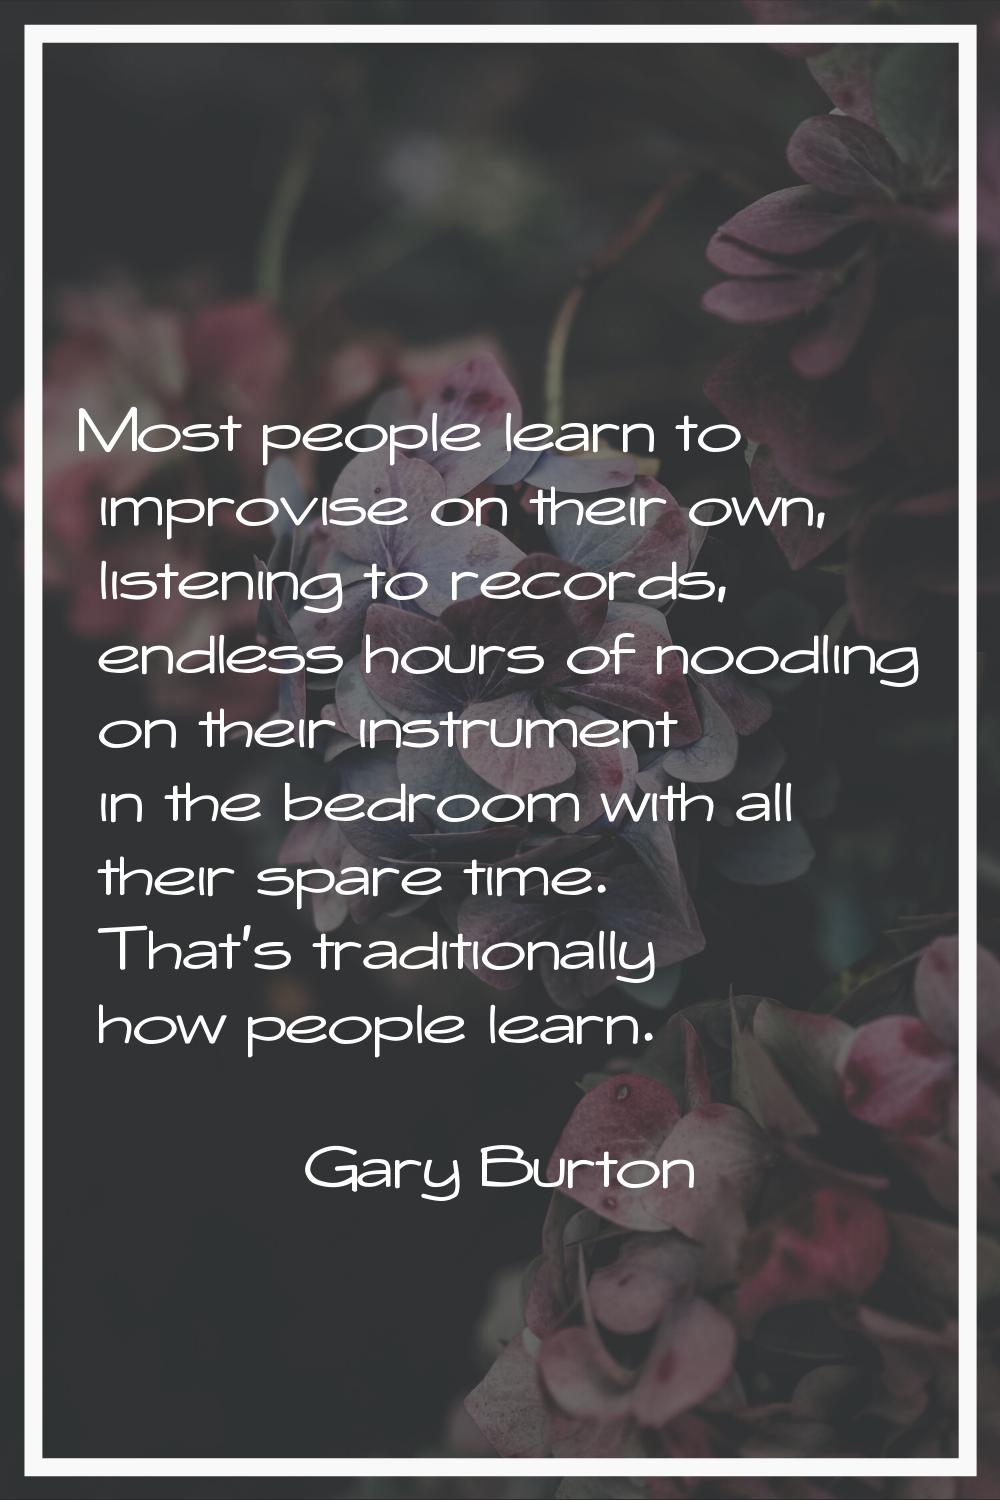 Most people learn to improvise on their own, listening to records, endless hours of noodling on the